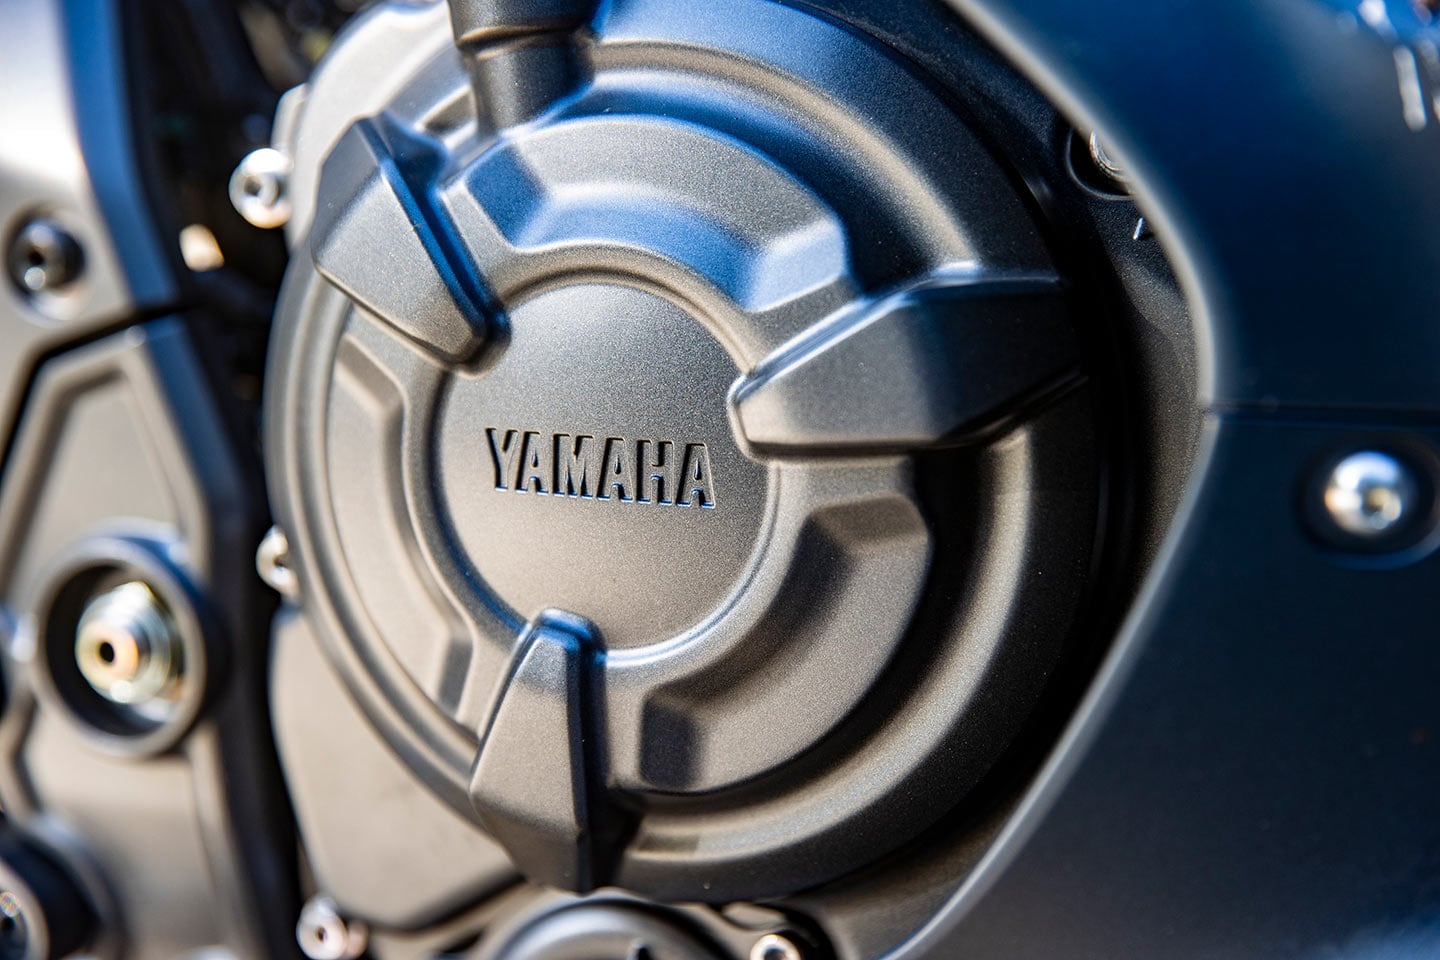 Yamaha’s CP2 engine makes the least horsepower but stays in the hunt with solid torque delivery.